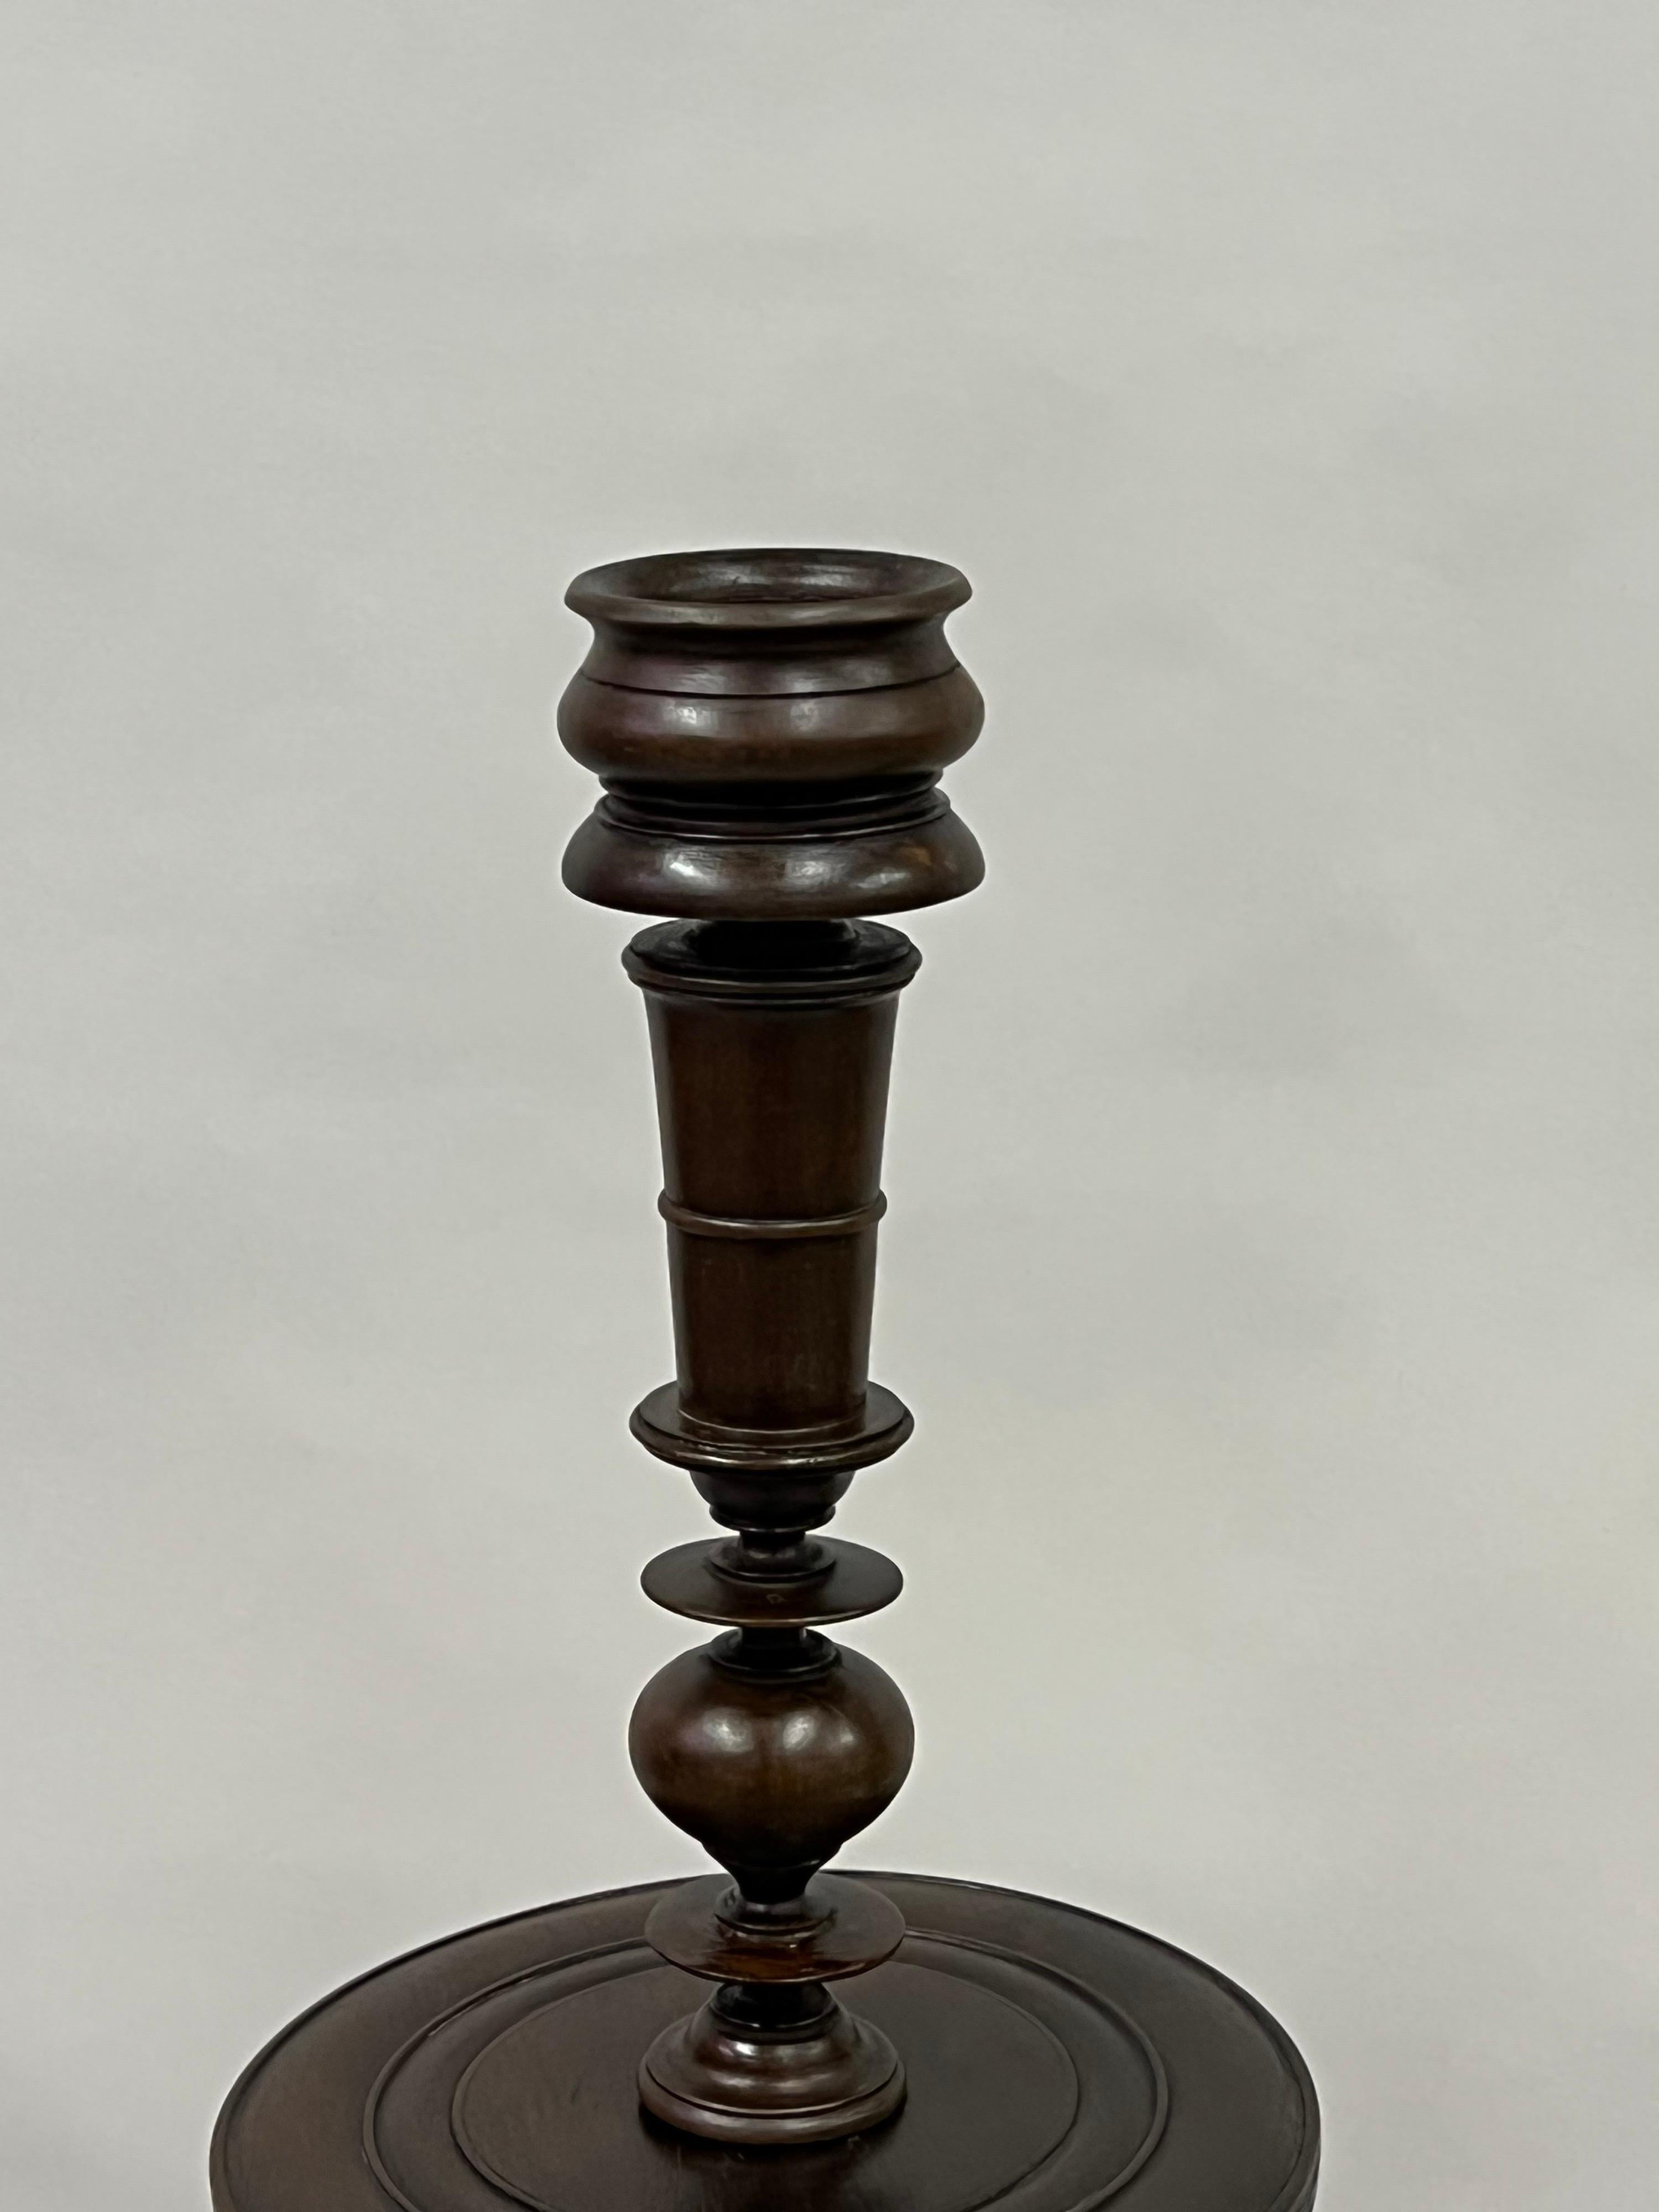 Pair of French Colonial Carved Teak Wood Table Lamp Bases or Candelabras c. 1930 For Sale 3